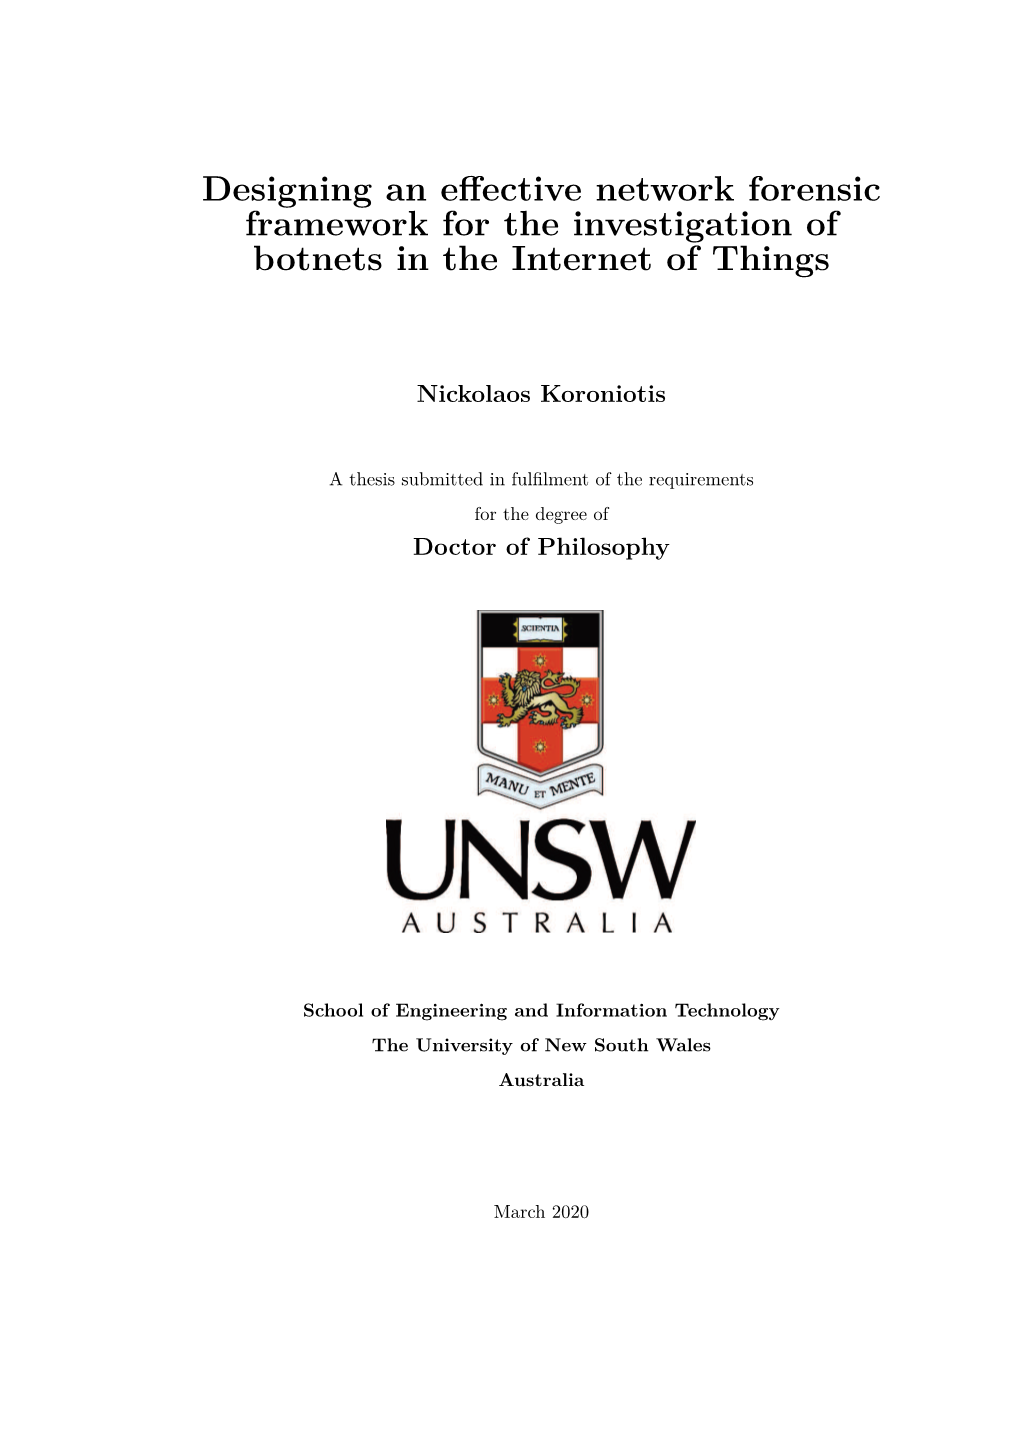 Designing an Effective Network Forensic Framework for The